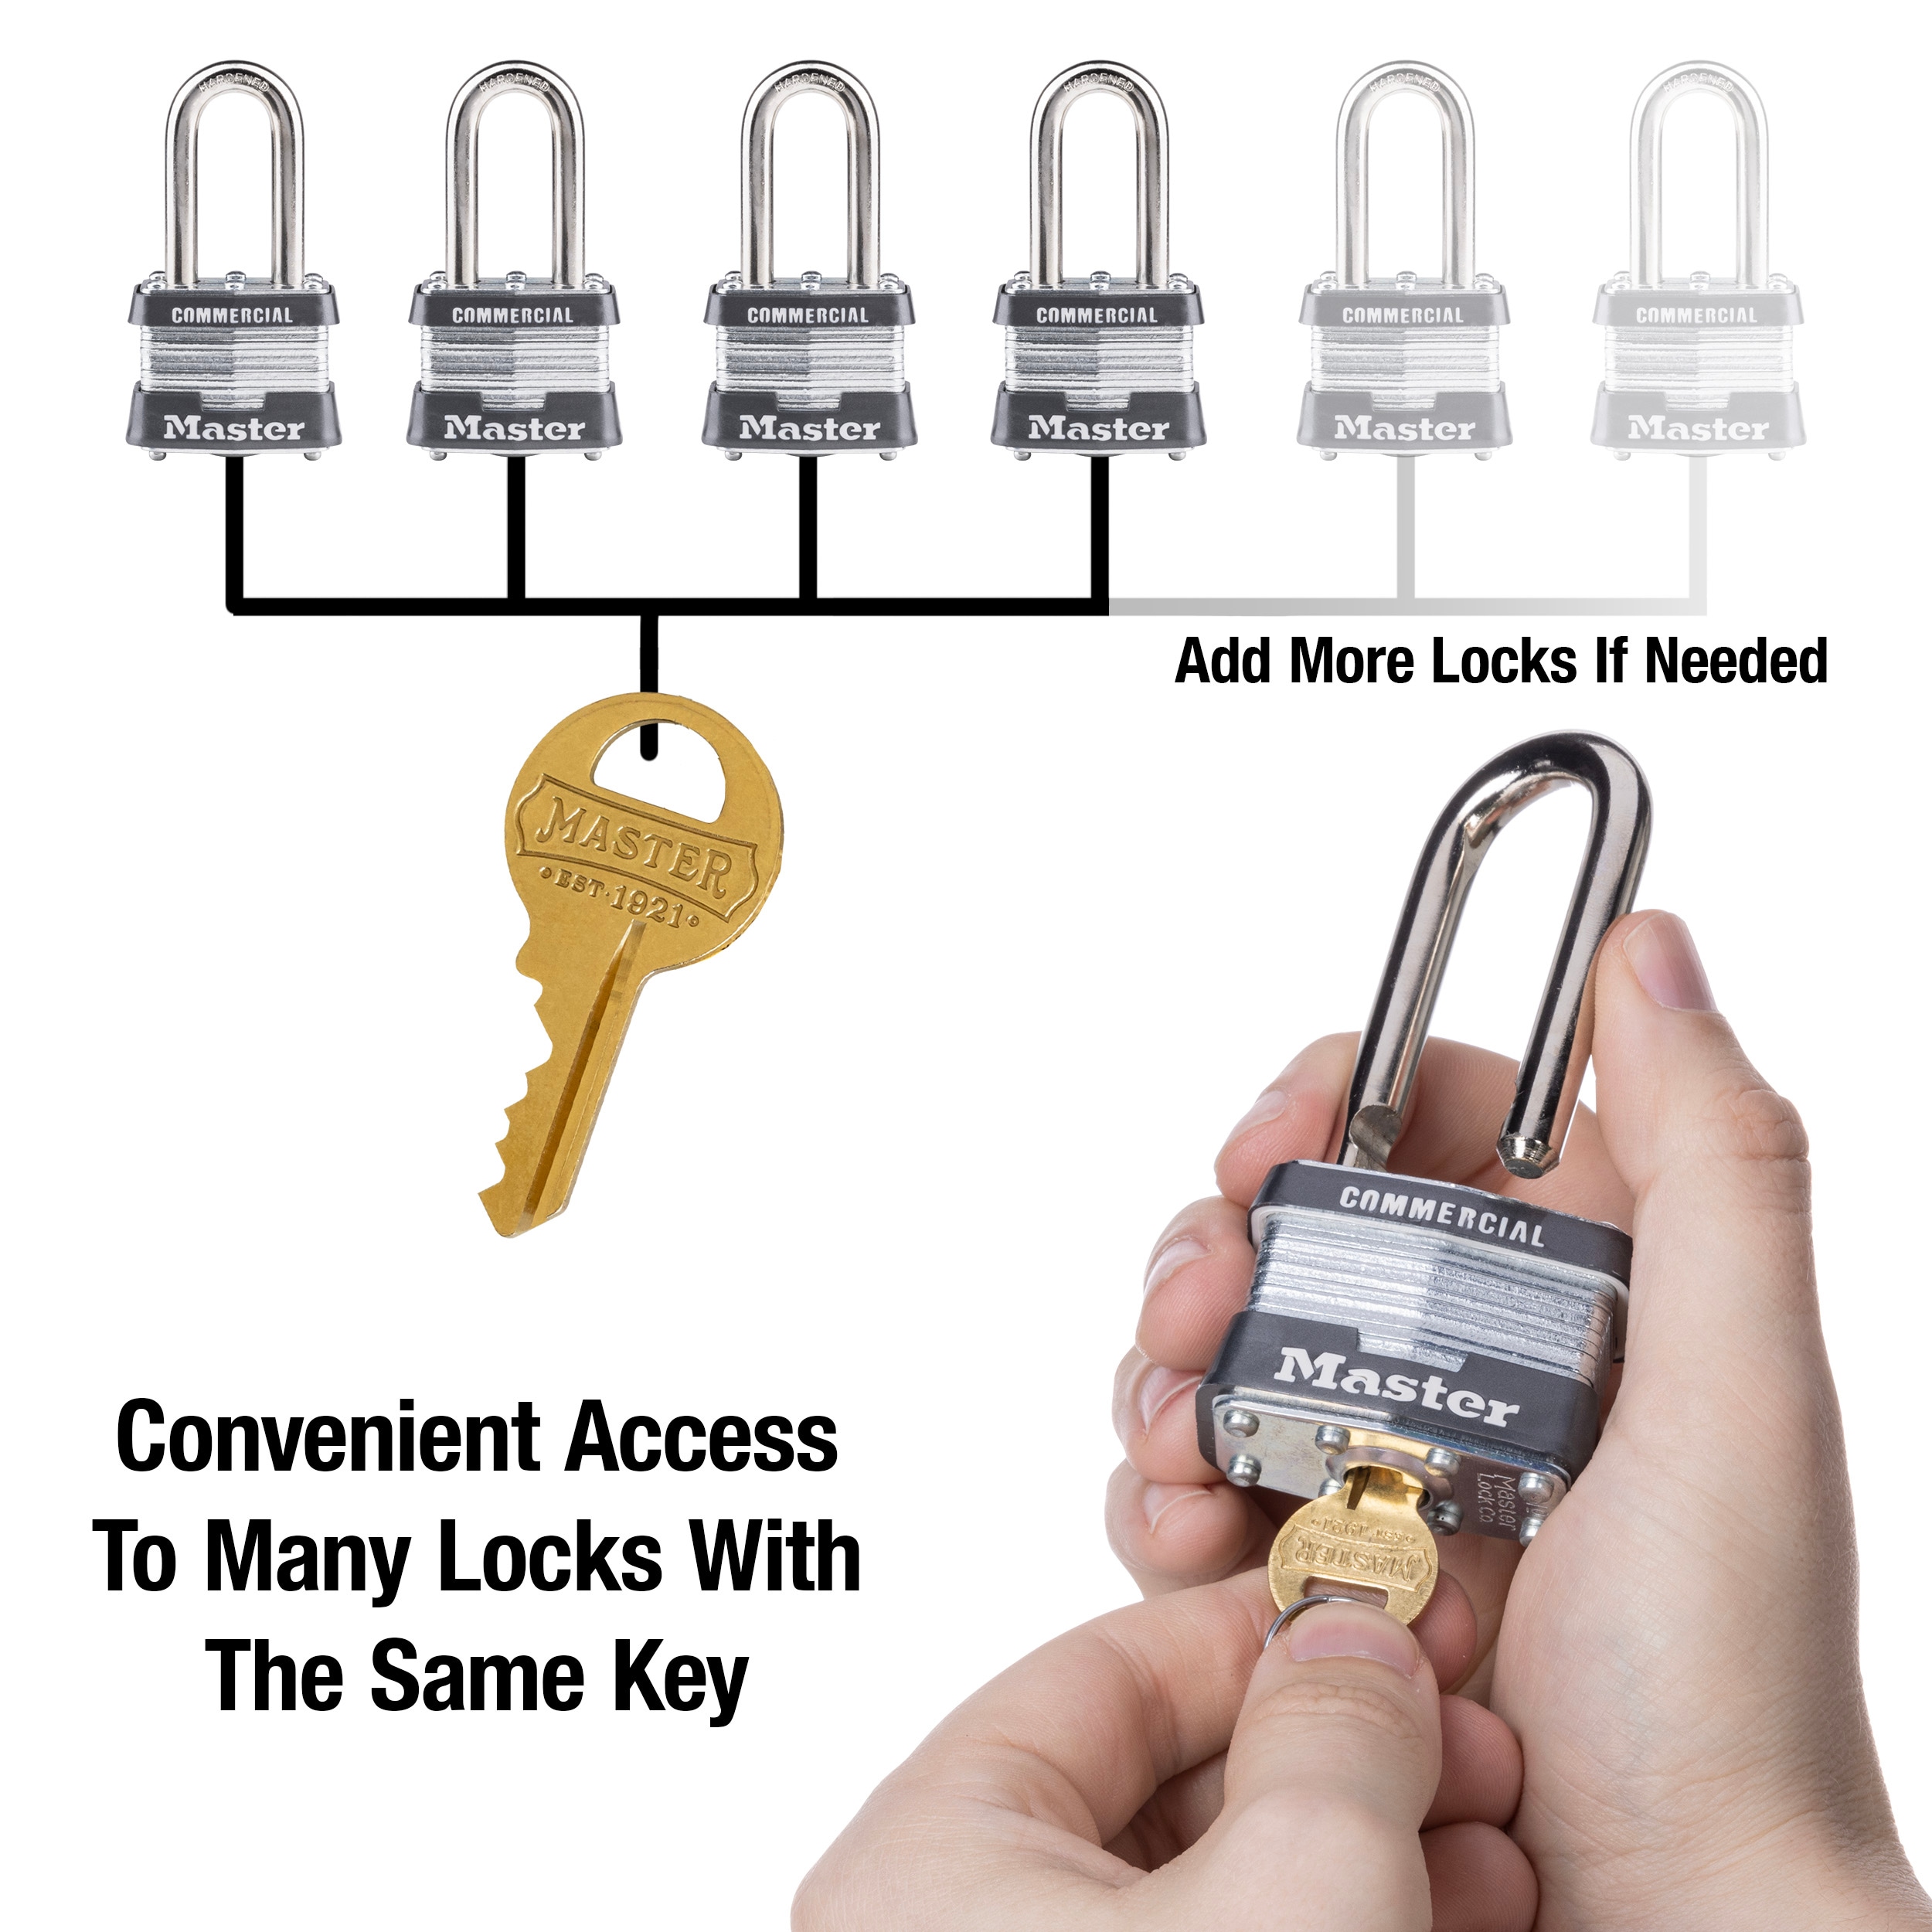 Master Lock (Keyed Alike to #3753) 1-1/2-in Shackle x 1.576-in